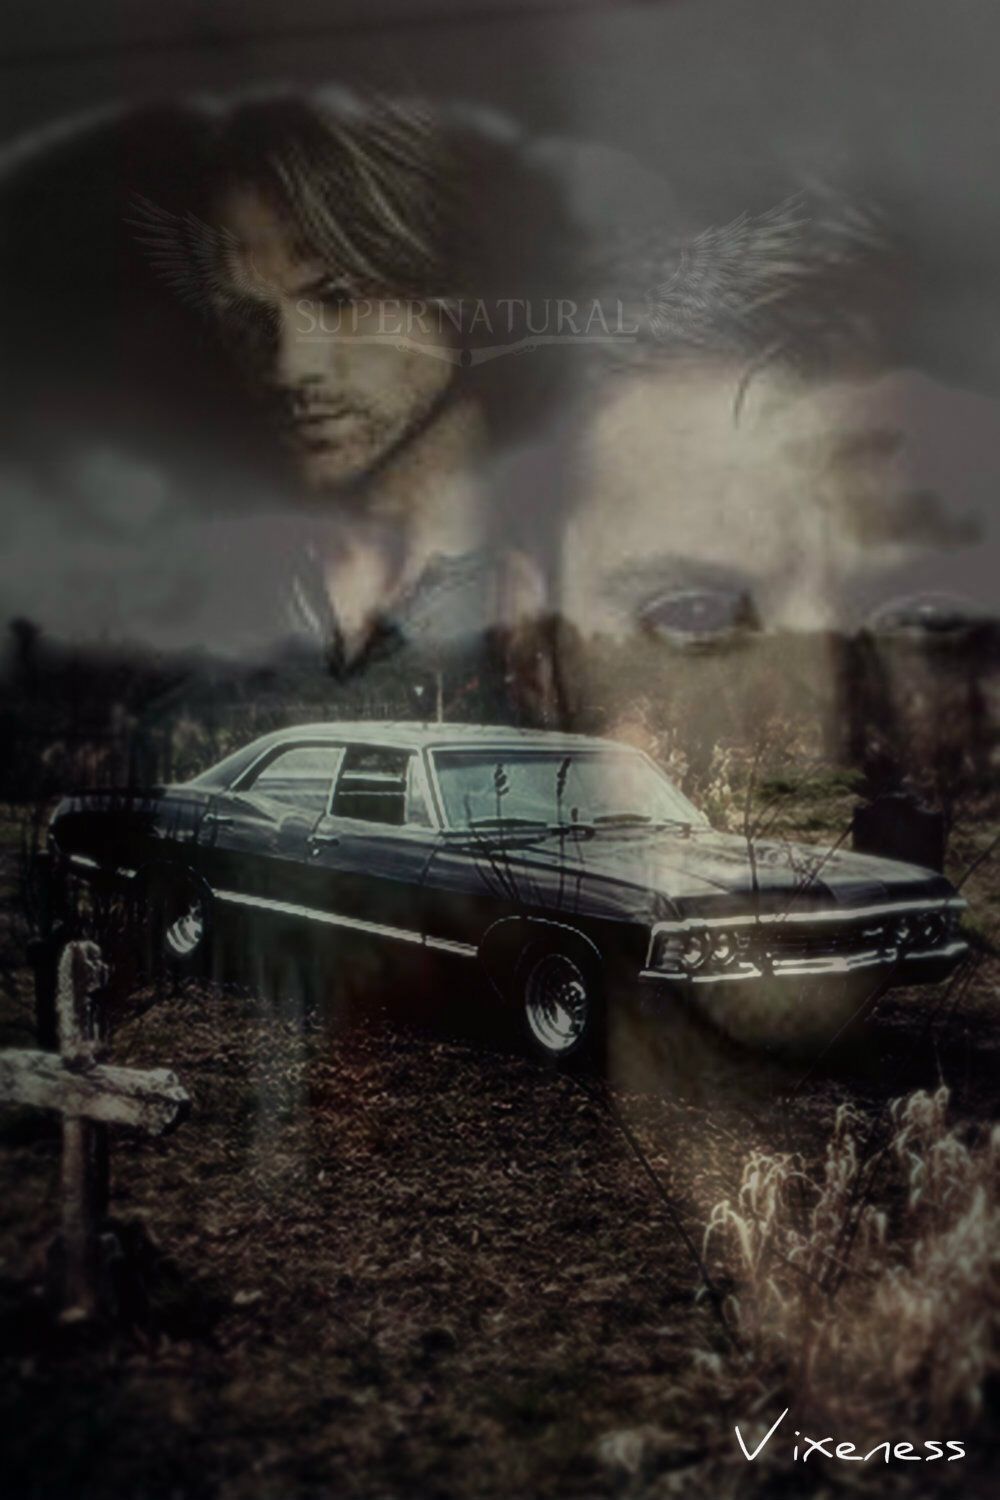 Supernatural 67 Chevy Impala iPhone Wallpaper By